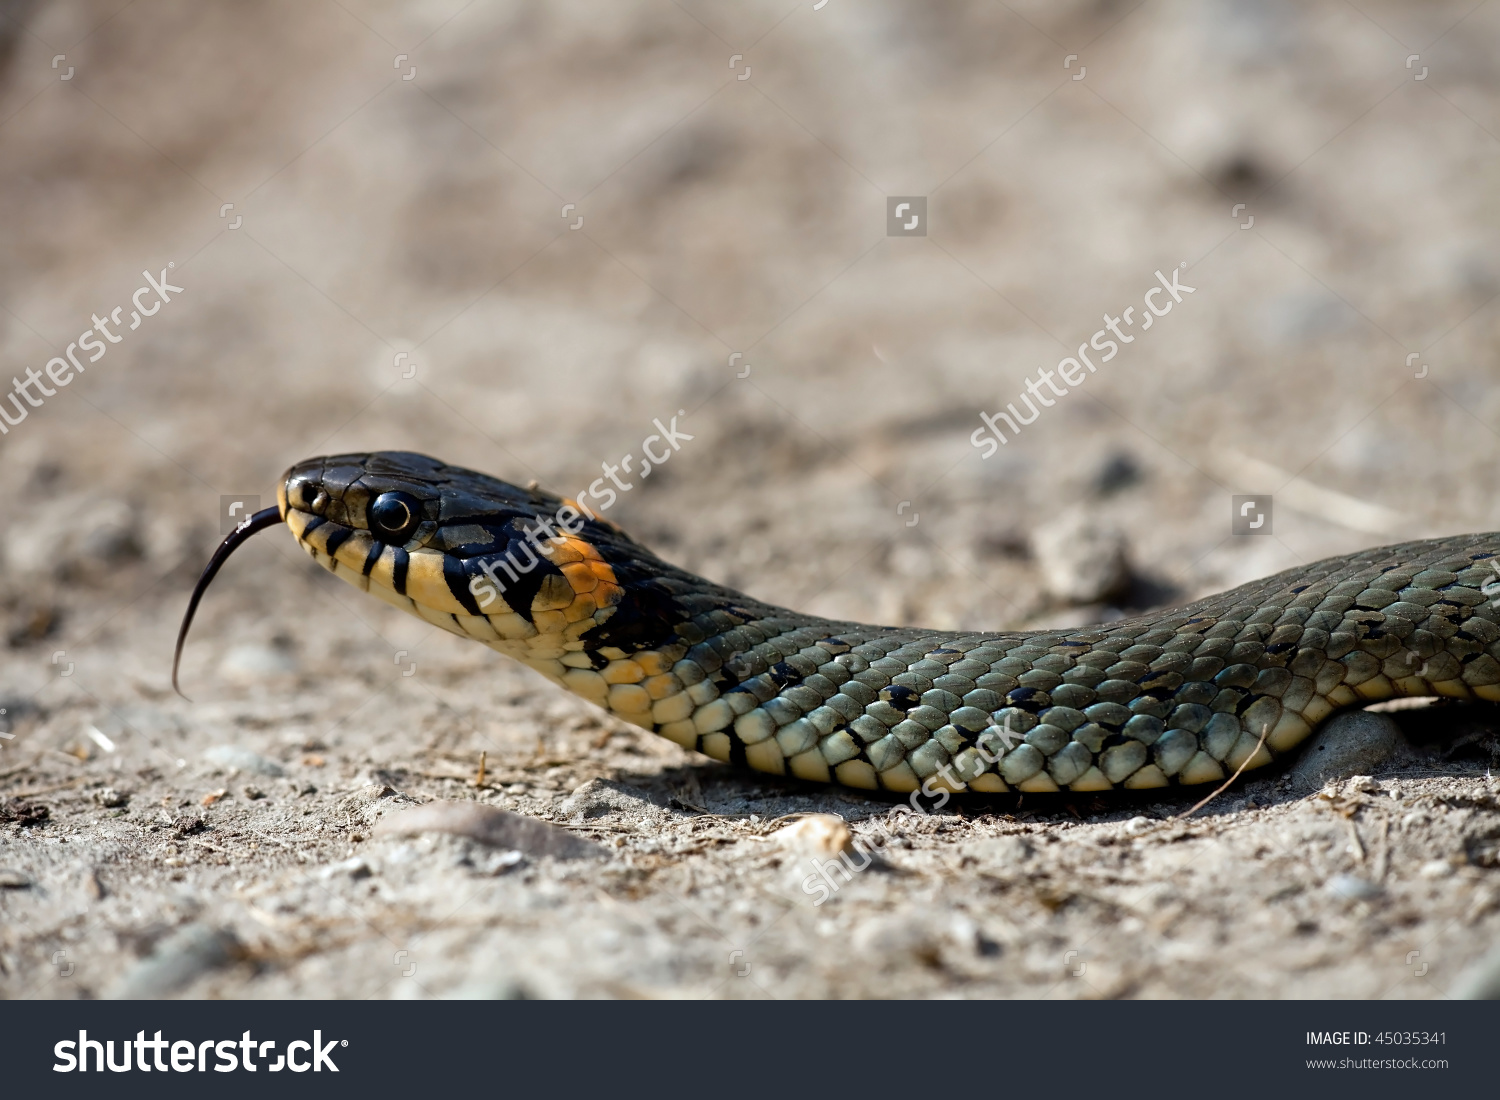 European Grass Snake clipart #14, Download drawings